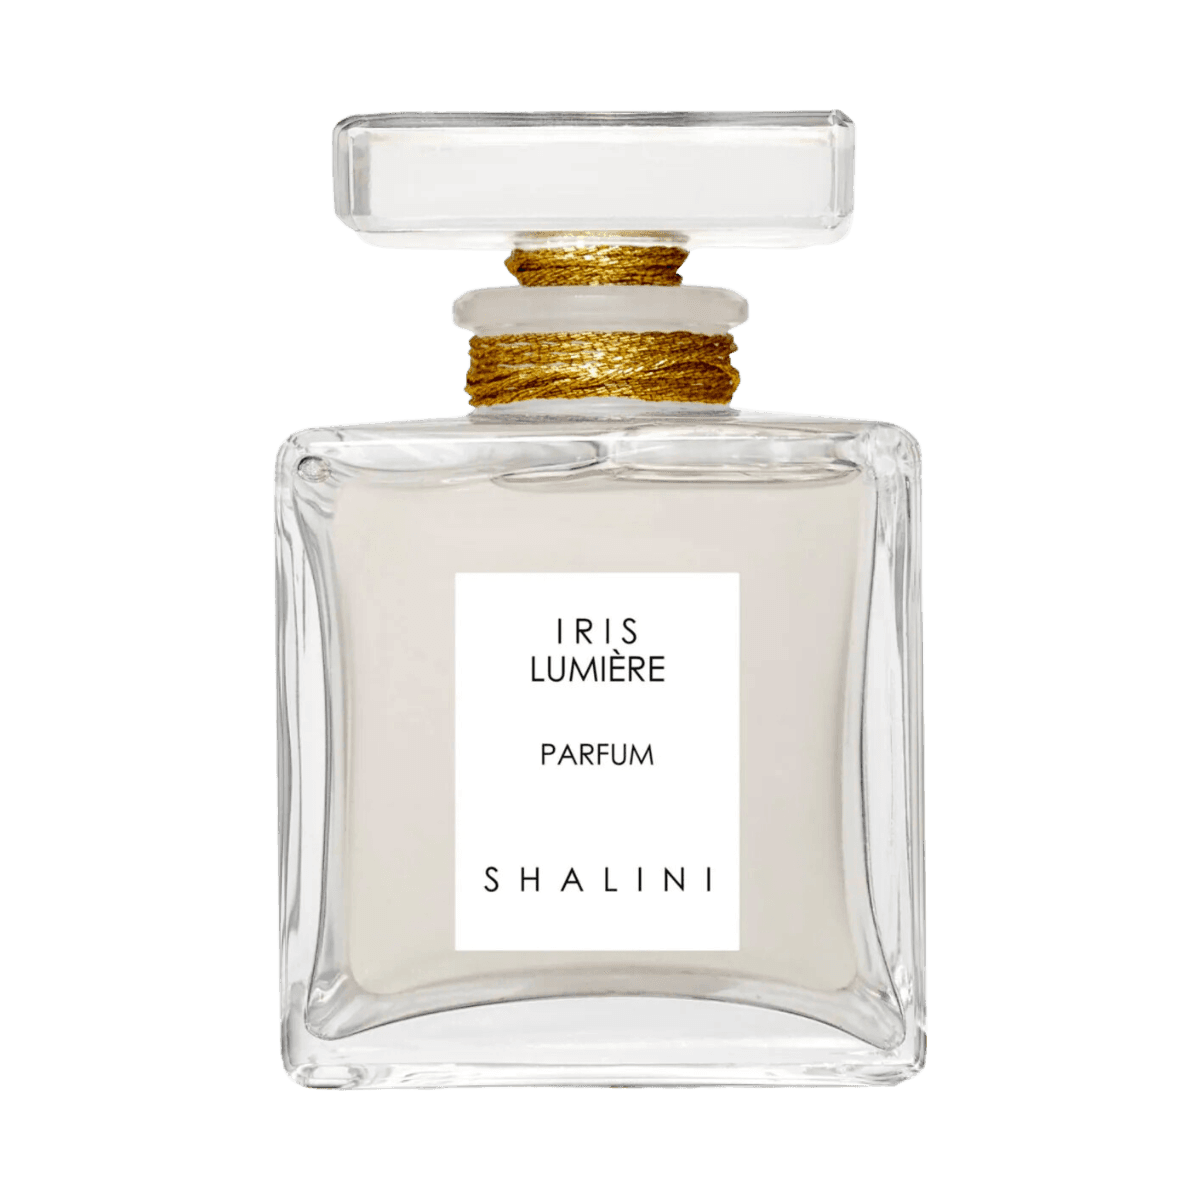 Image of Iris Lumiere glass stopper by the perfume brand Shalini